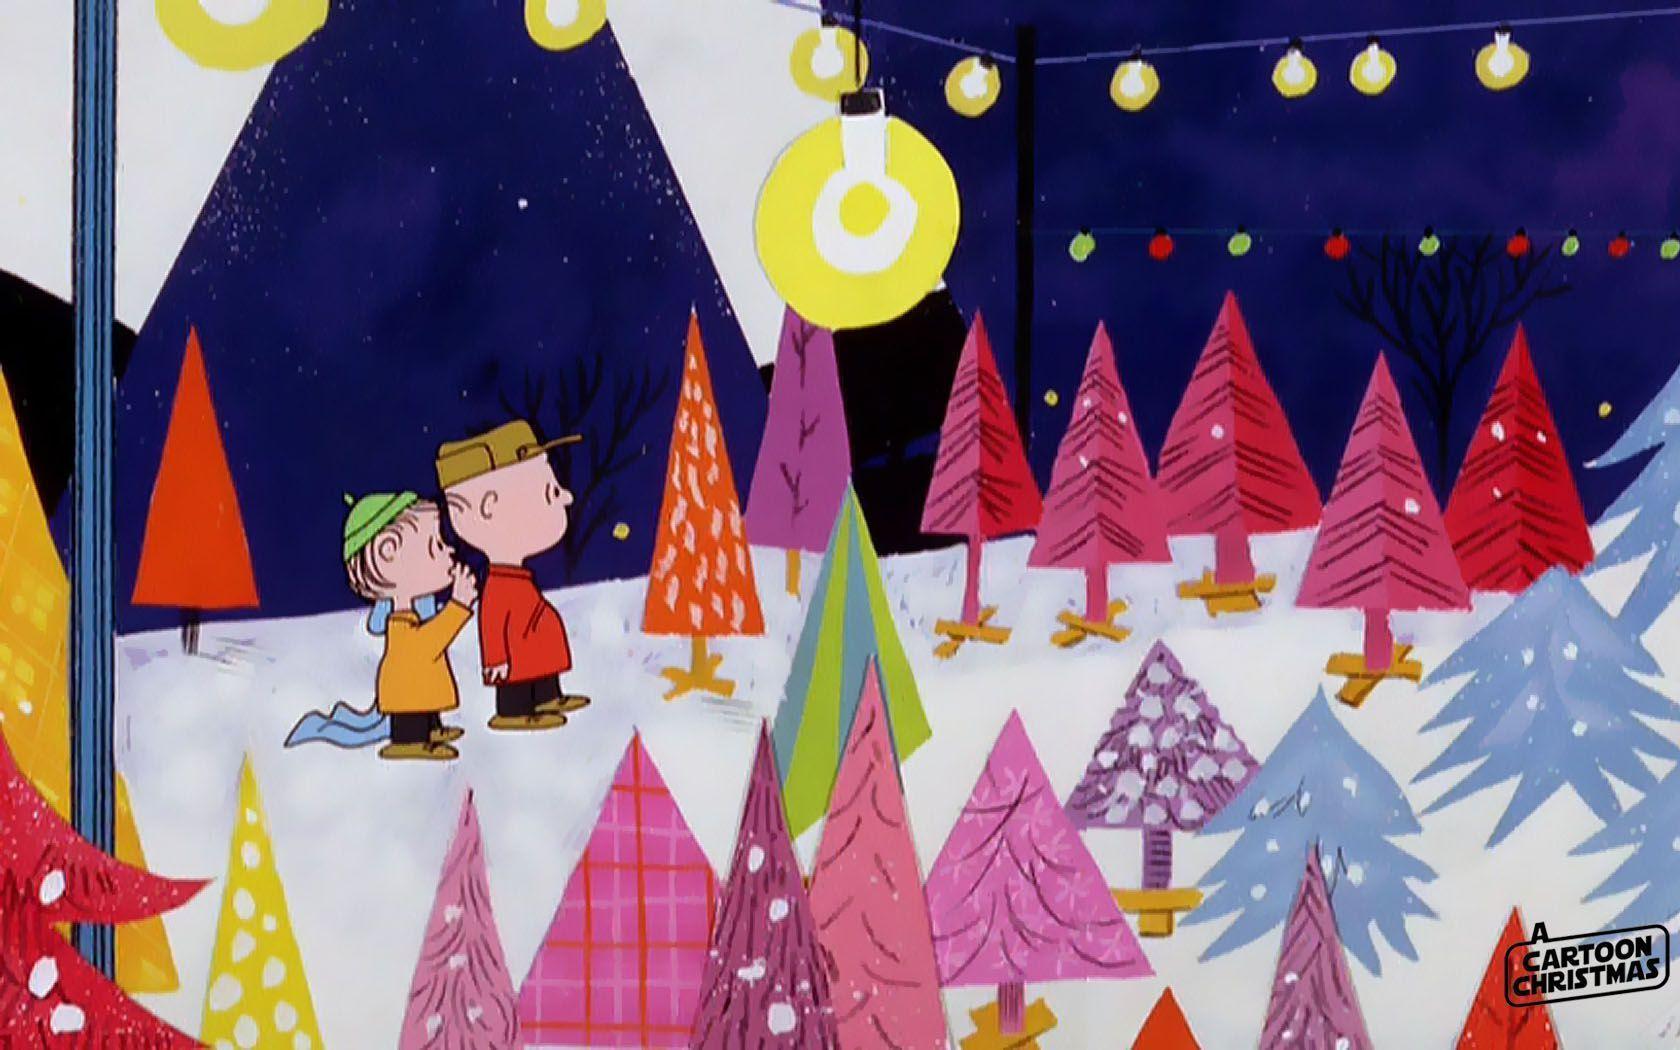 Wallpapers For > Charlie Brown Christmas Tree Wallpapers